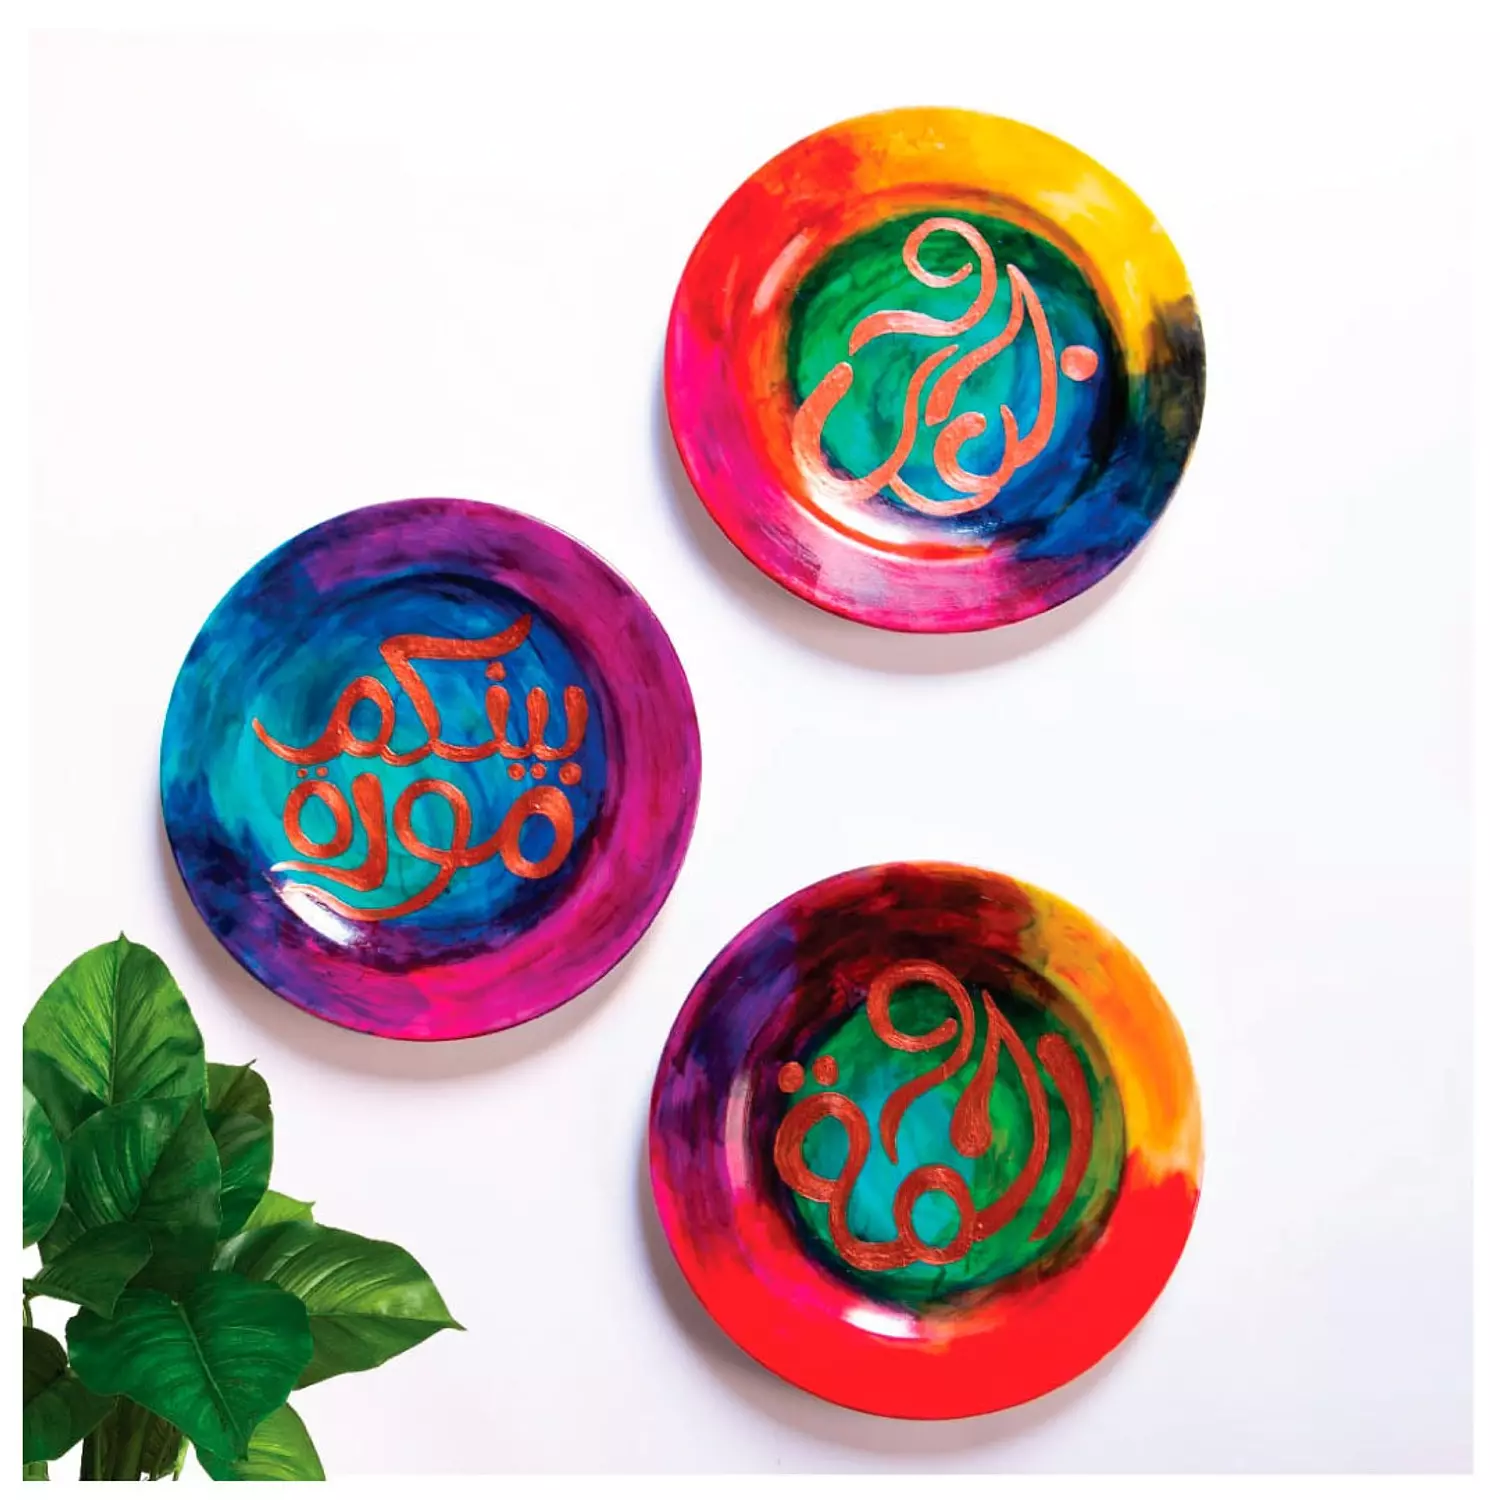 <h3><span style="color: rgb(31, 41, 55)">Wall Plates</span></h3>